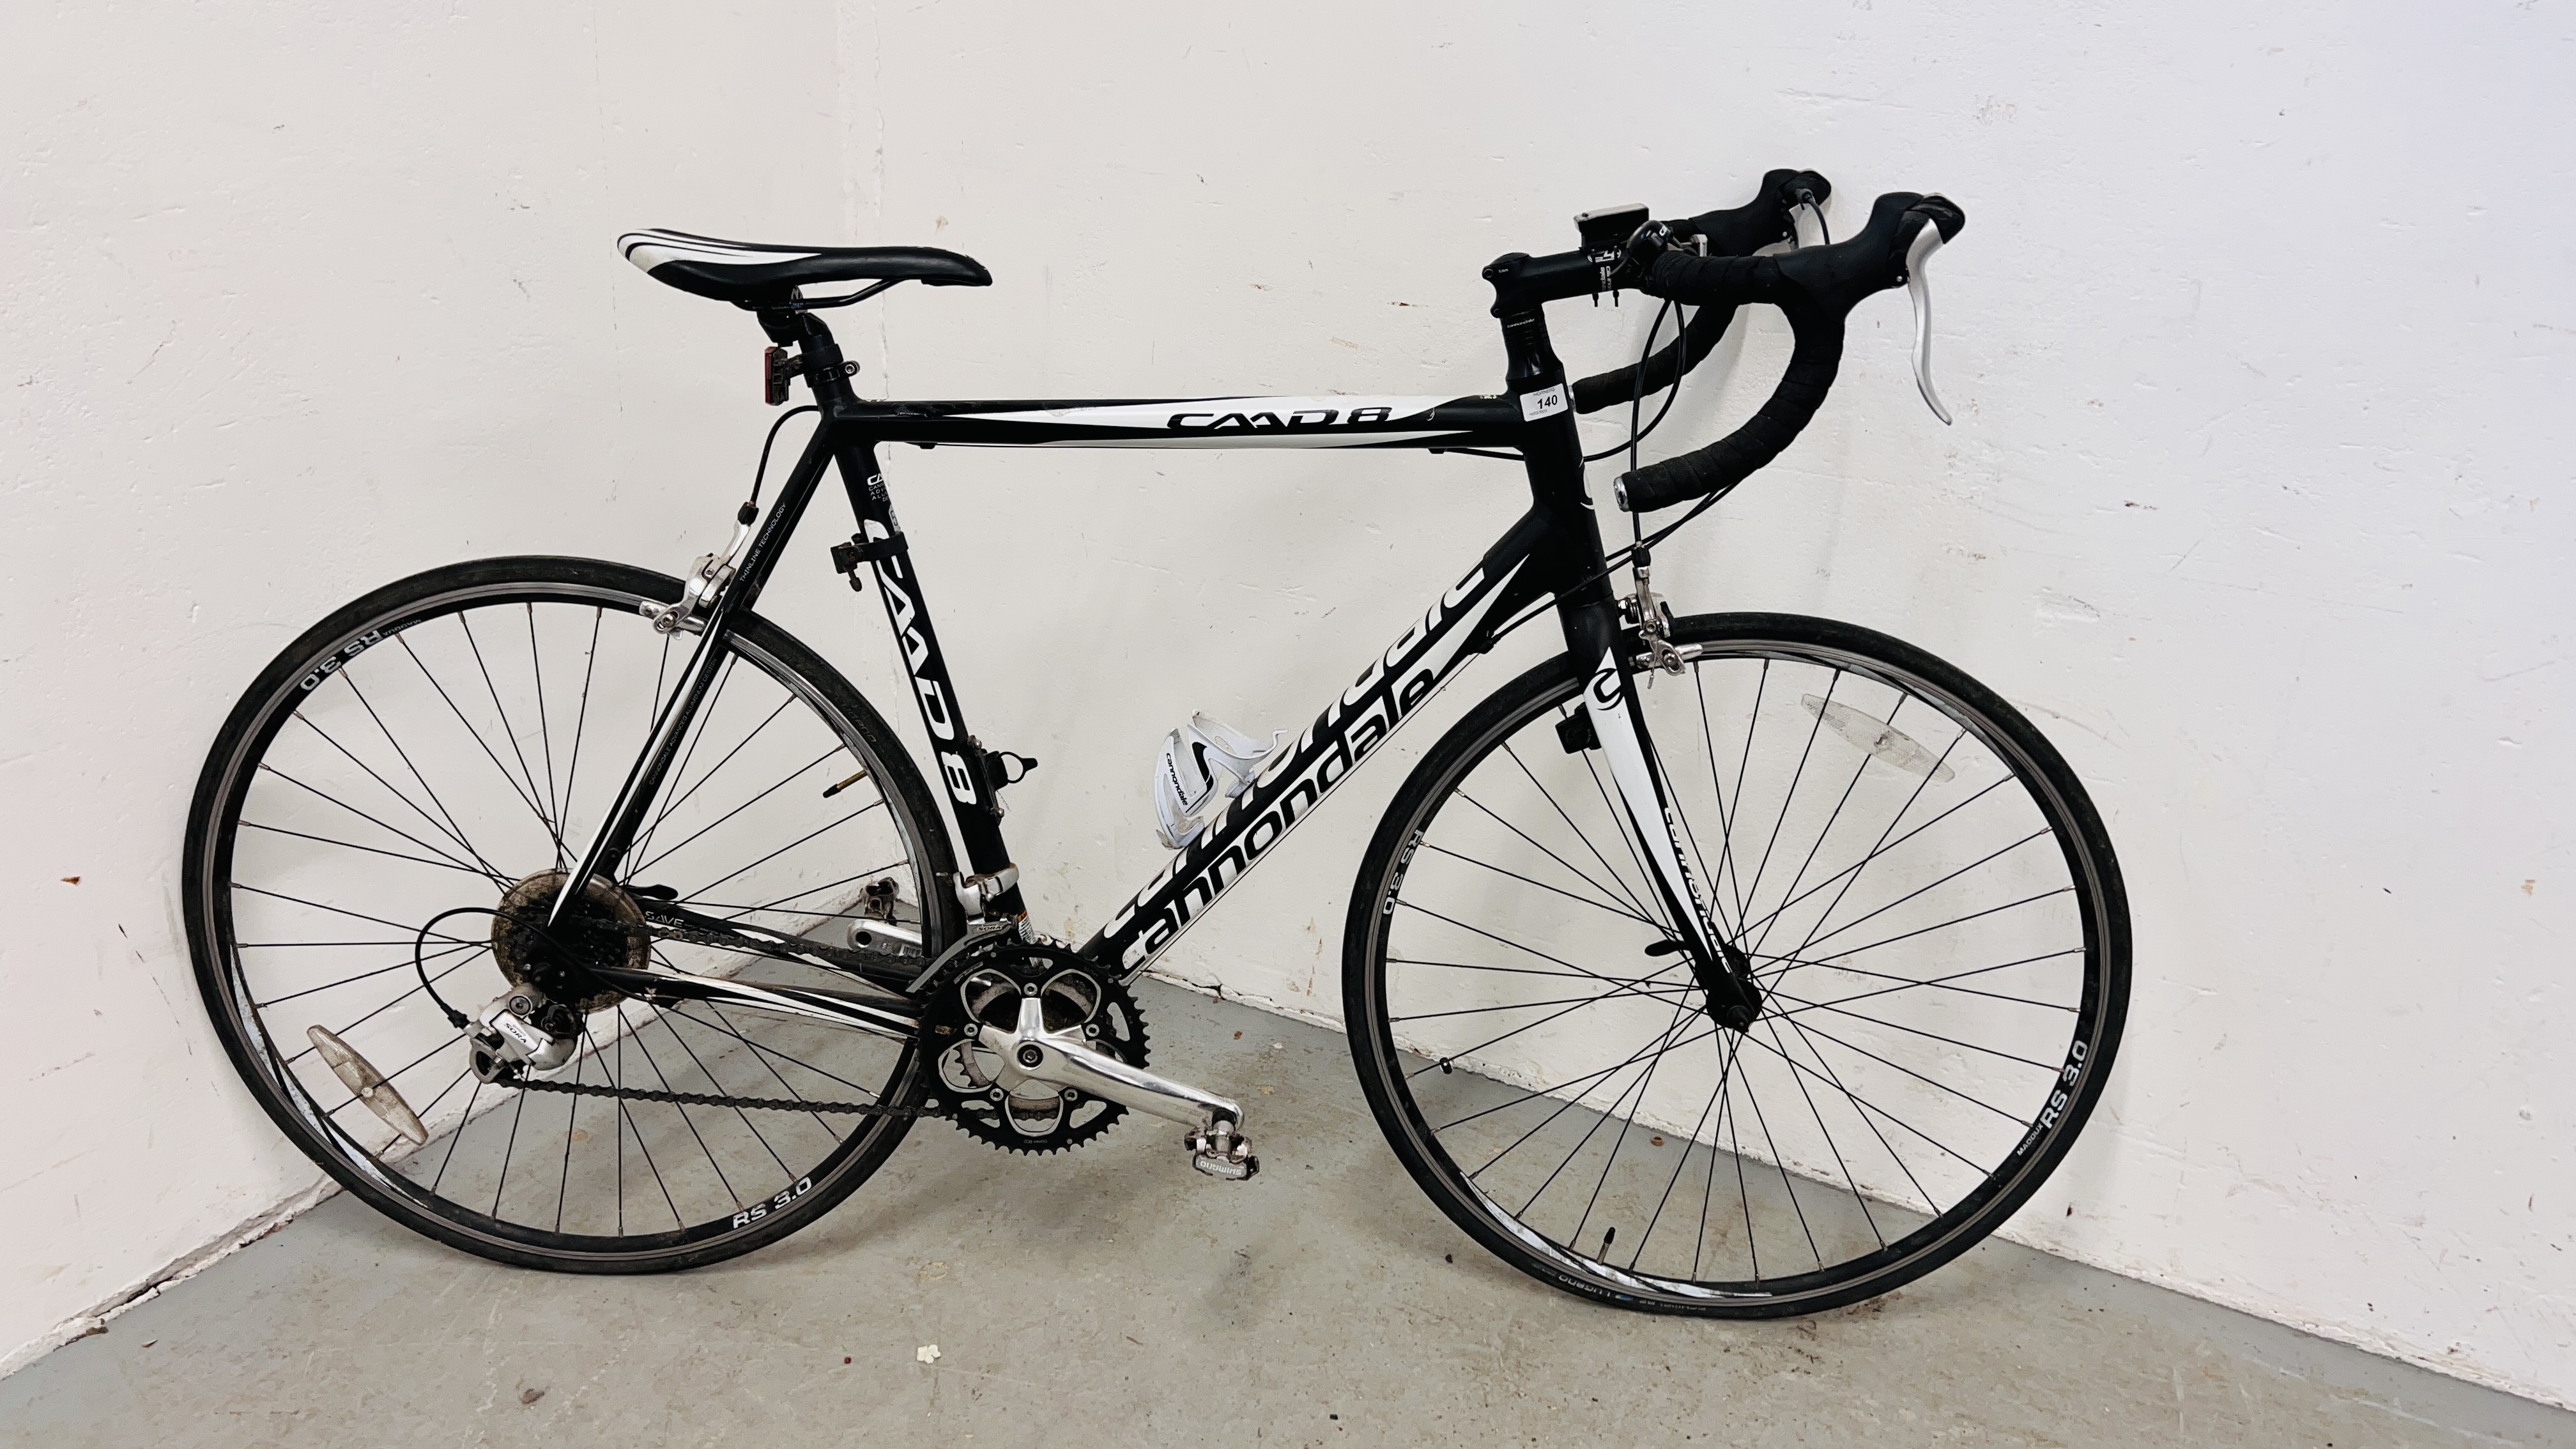 A GENTS CANNONDALE CAAD 8 RACING BIKE.